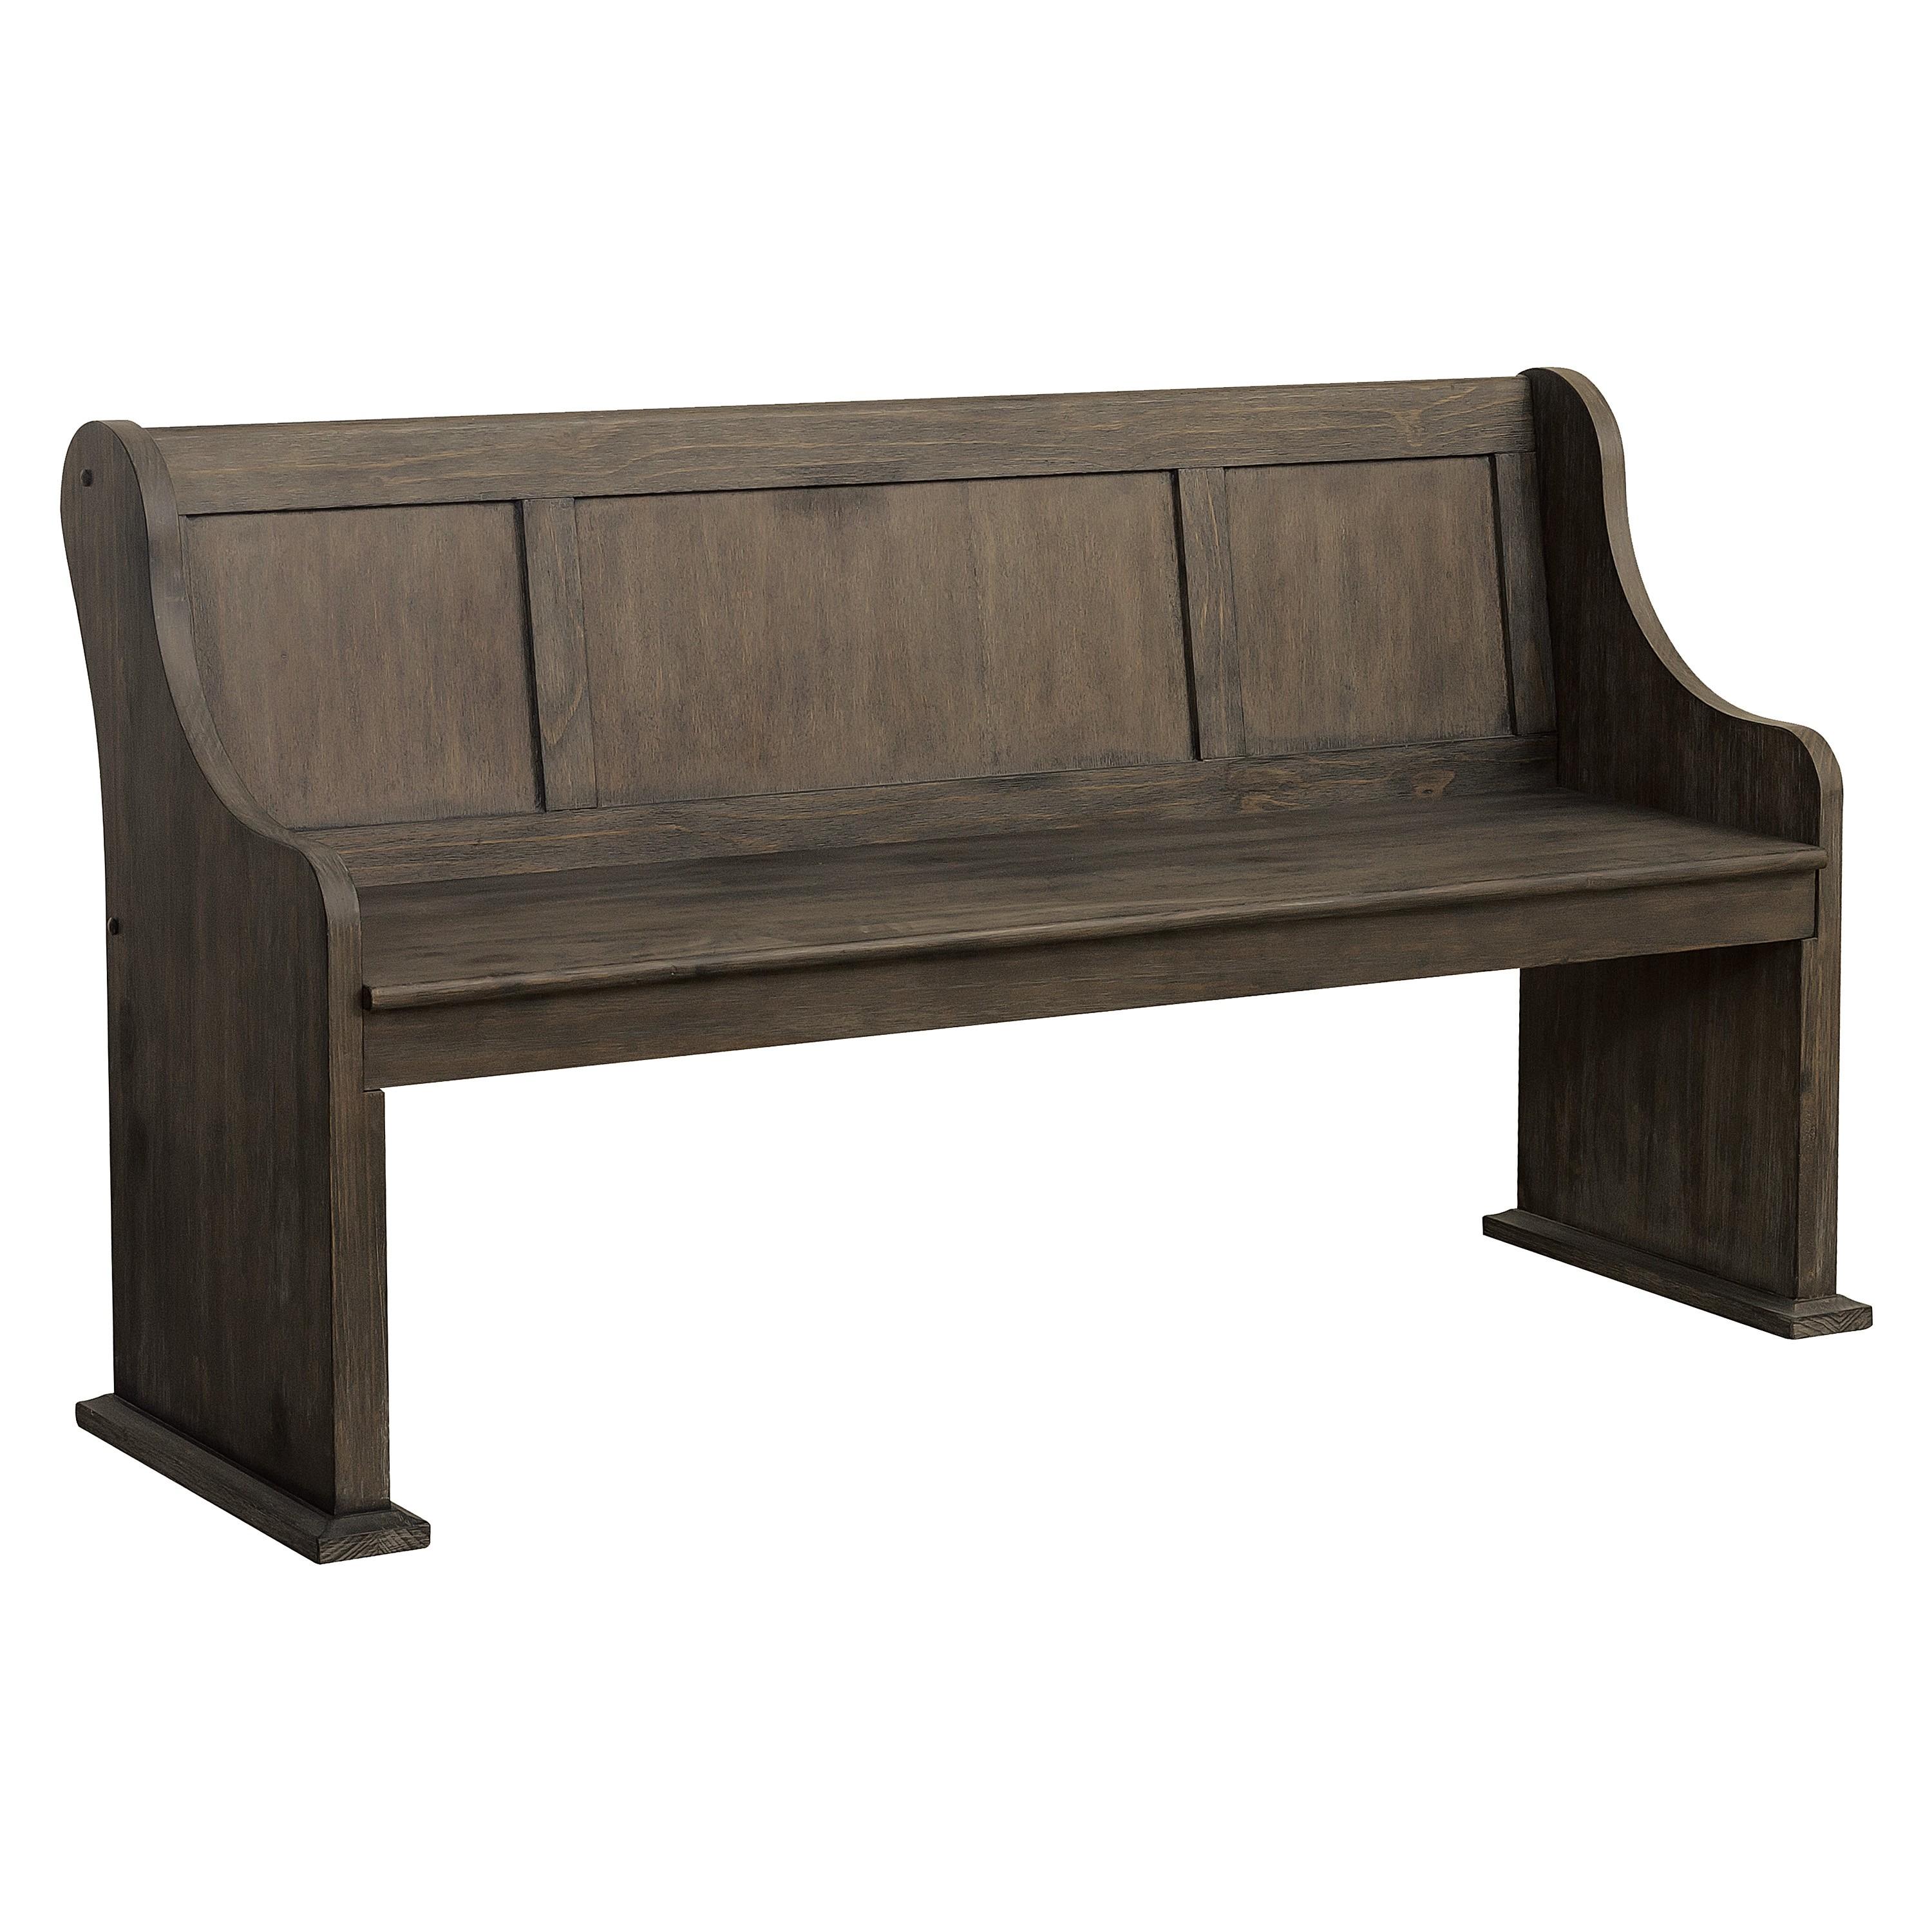 Traditional Dining Bench 5438-14A Toulon 5438-14A in Dark Oak 